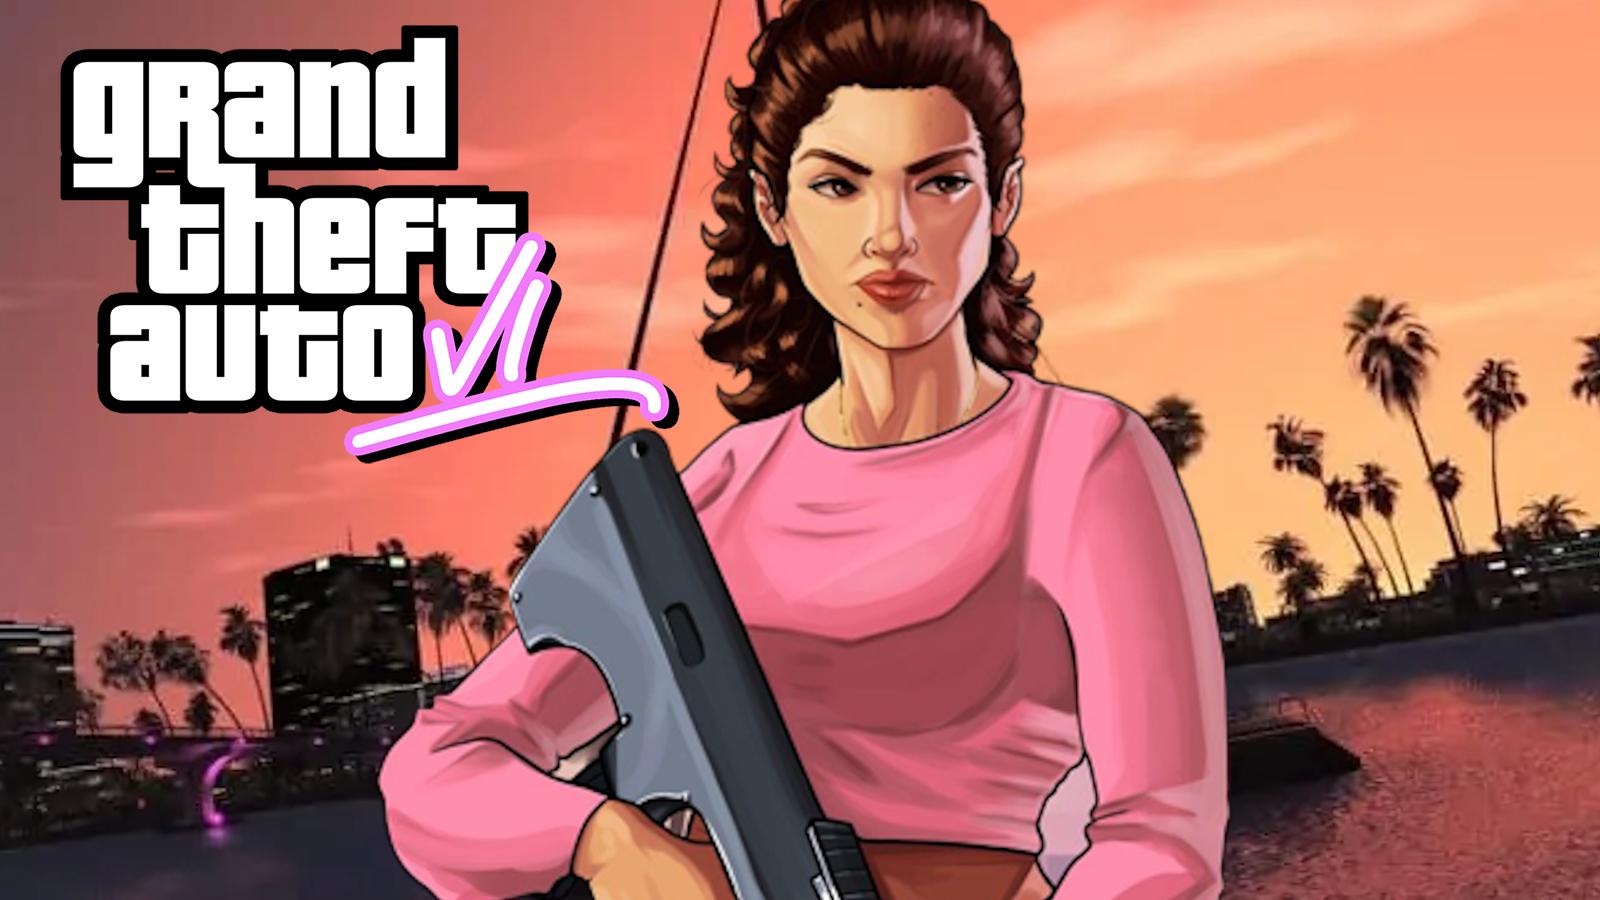 Take-Two CEO Says GTA 6 Leaks Didn't Impact Business, But Were 'an